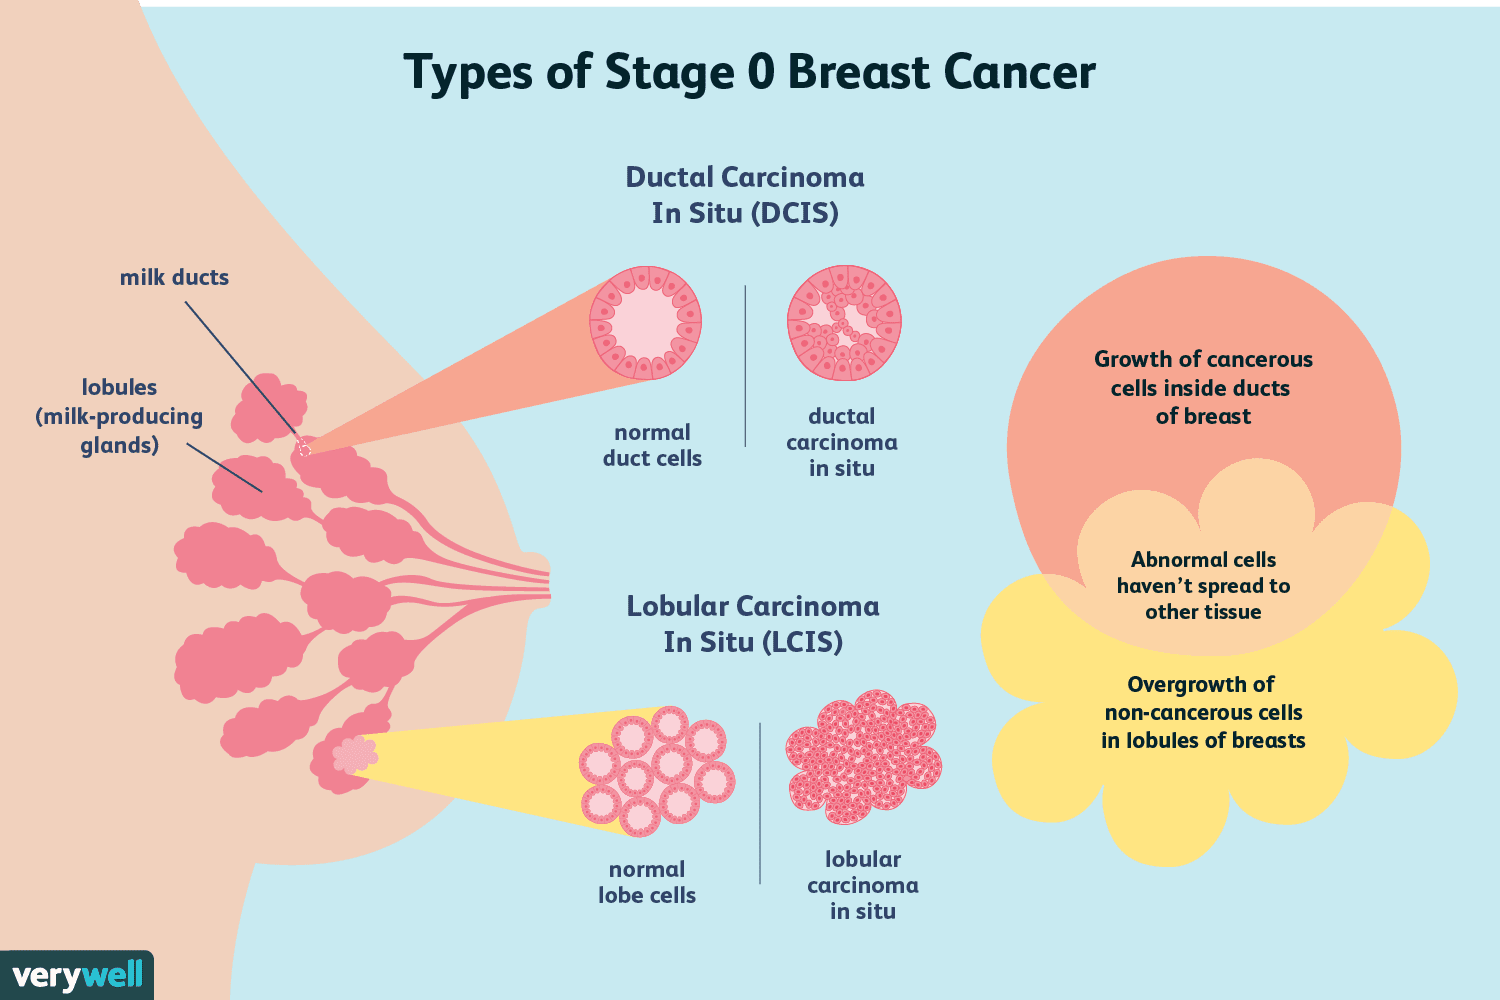 Stage 0 Breast Cancer: Diagnosis, Treatment, and Survival